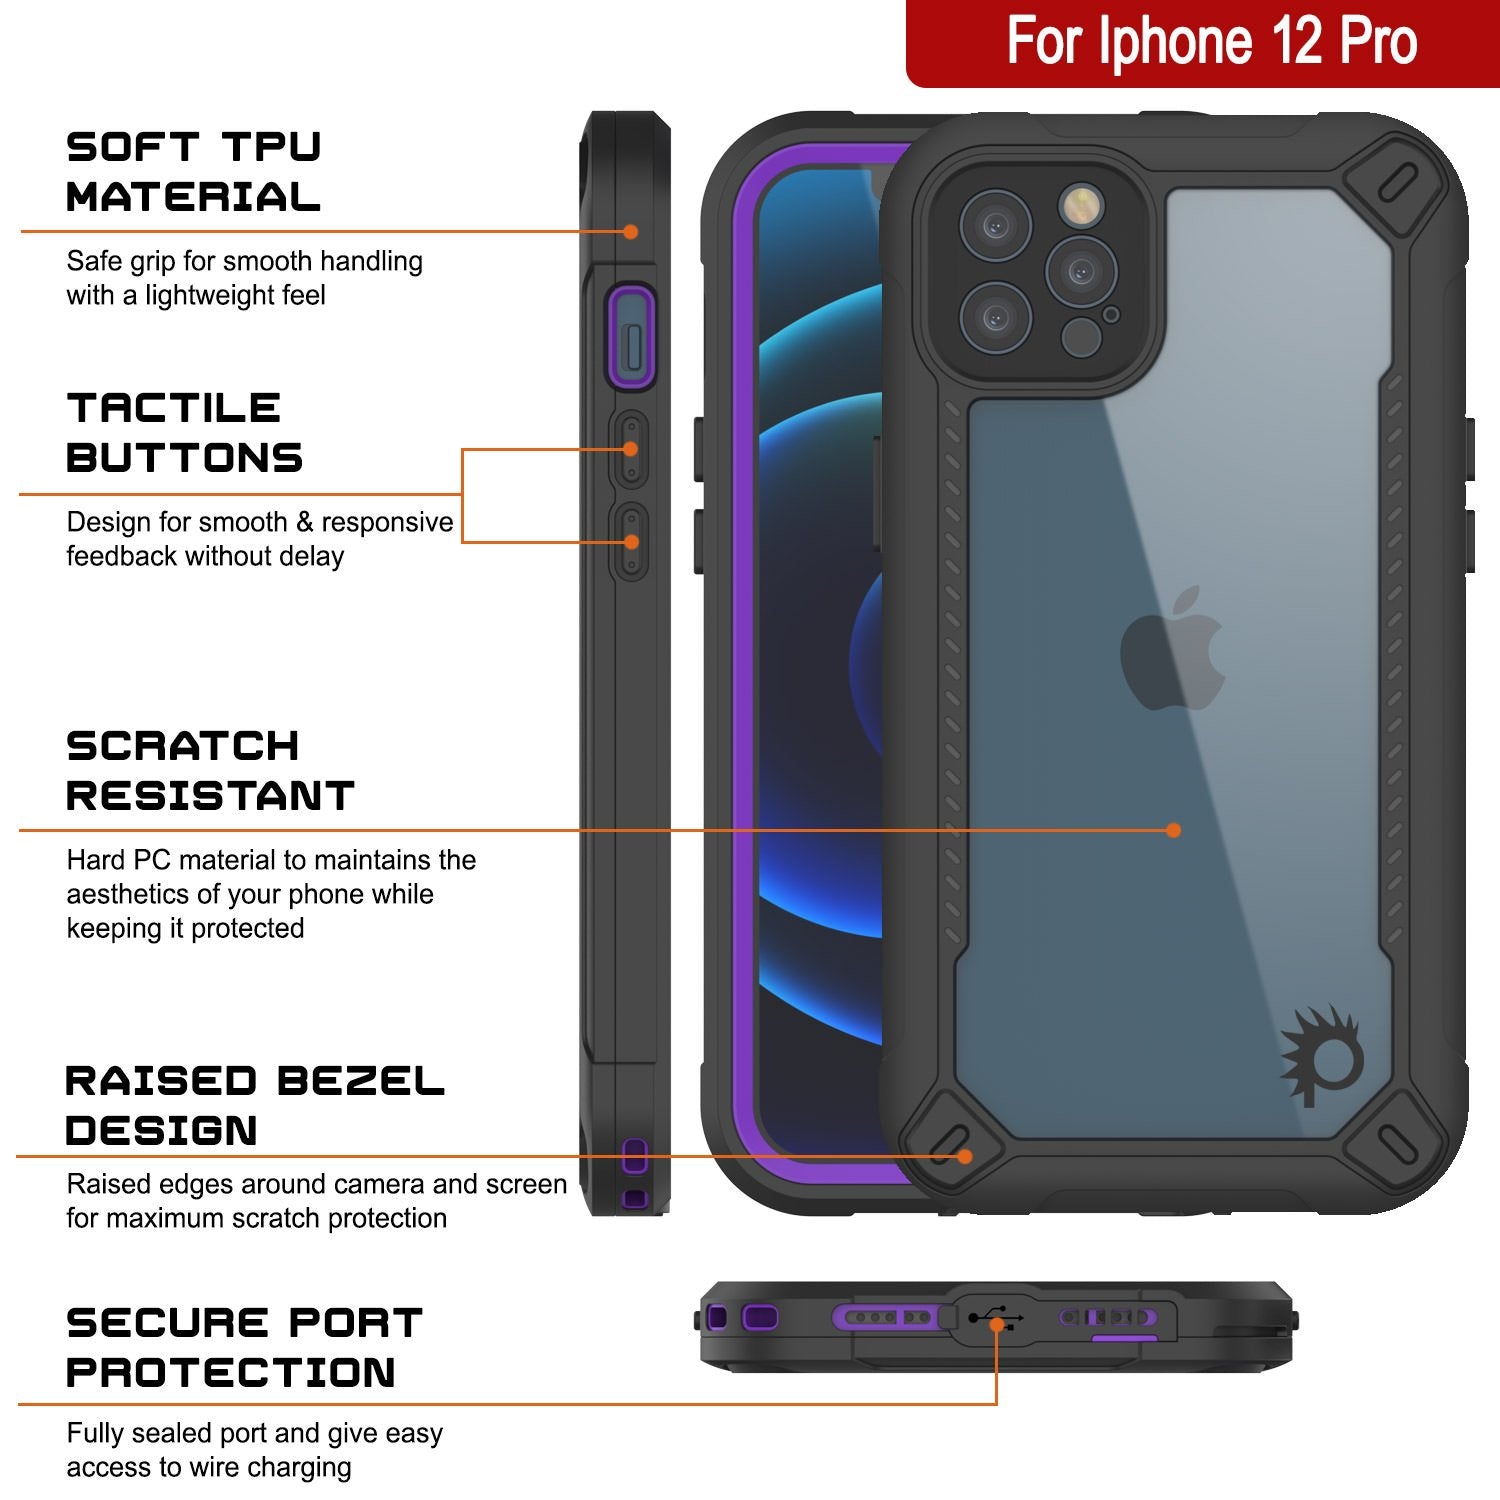 iPhone 12 Pro Waterproof IP68 Case, Punkcase [Purple]  [Maximus Series] [Slim Fit] [IP68 Certified] [Shockresistant] Clear Armor Cover with Screen Protector | Ultimate Protection